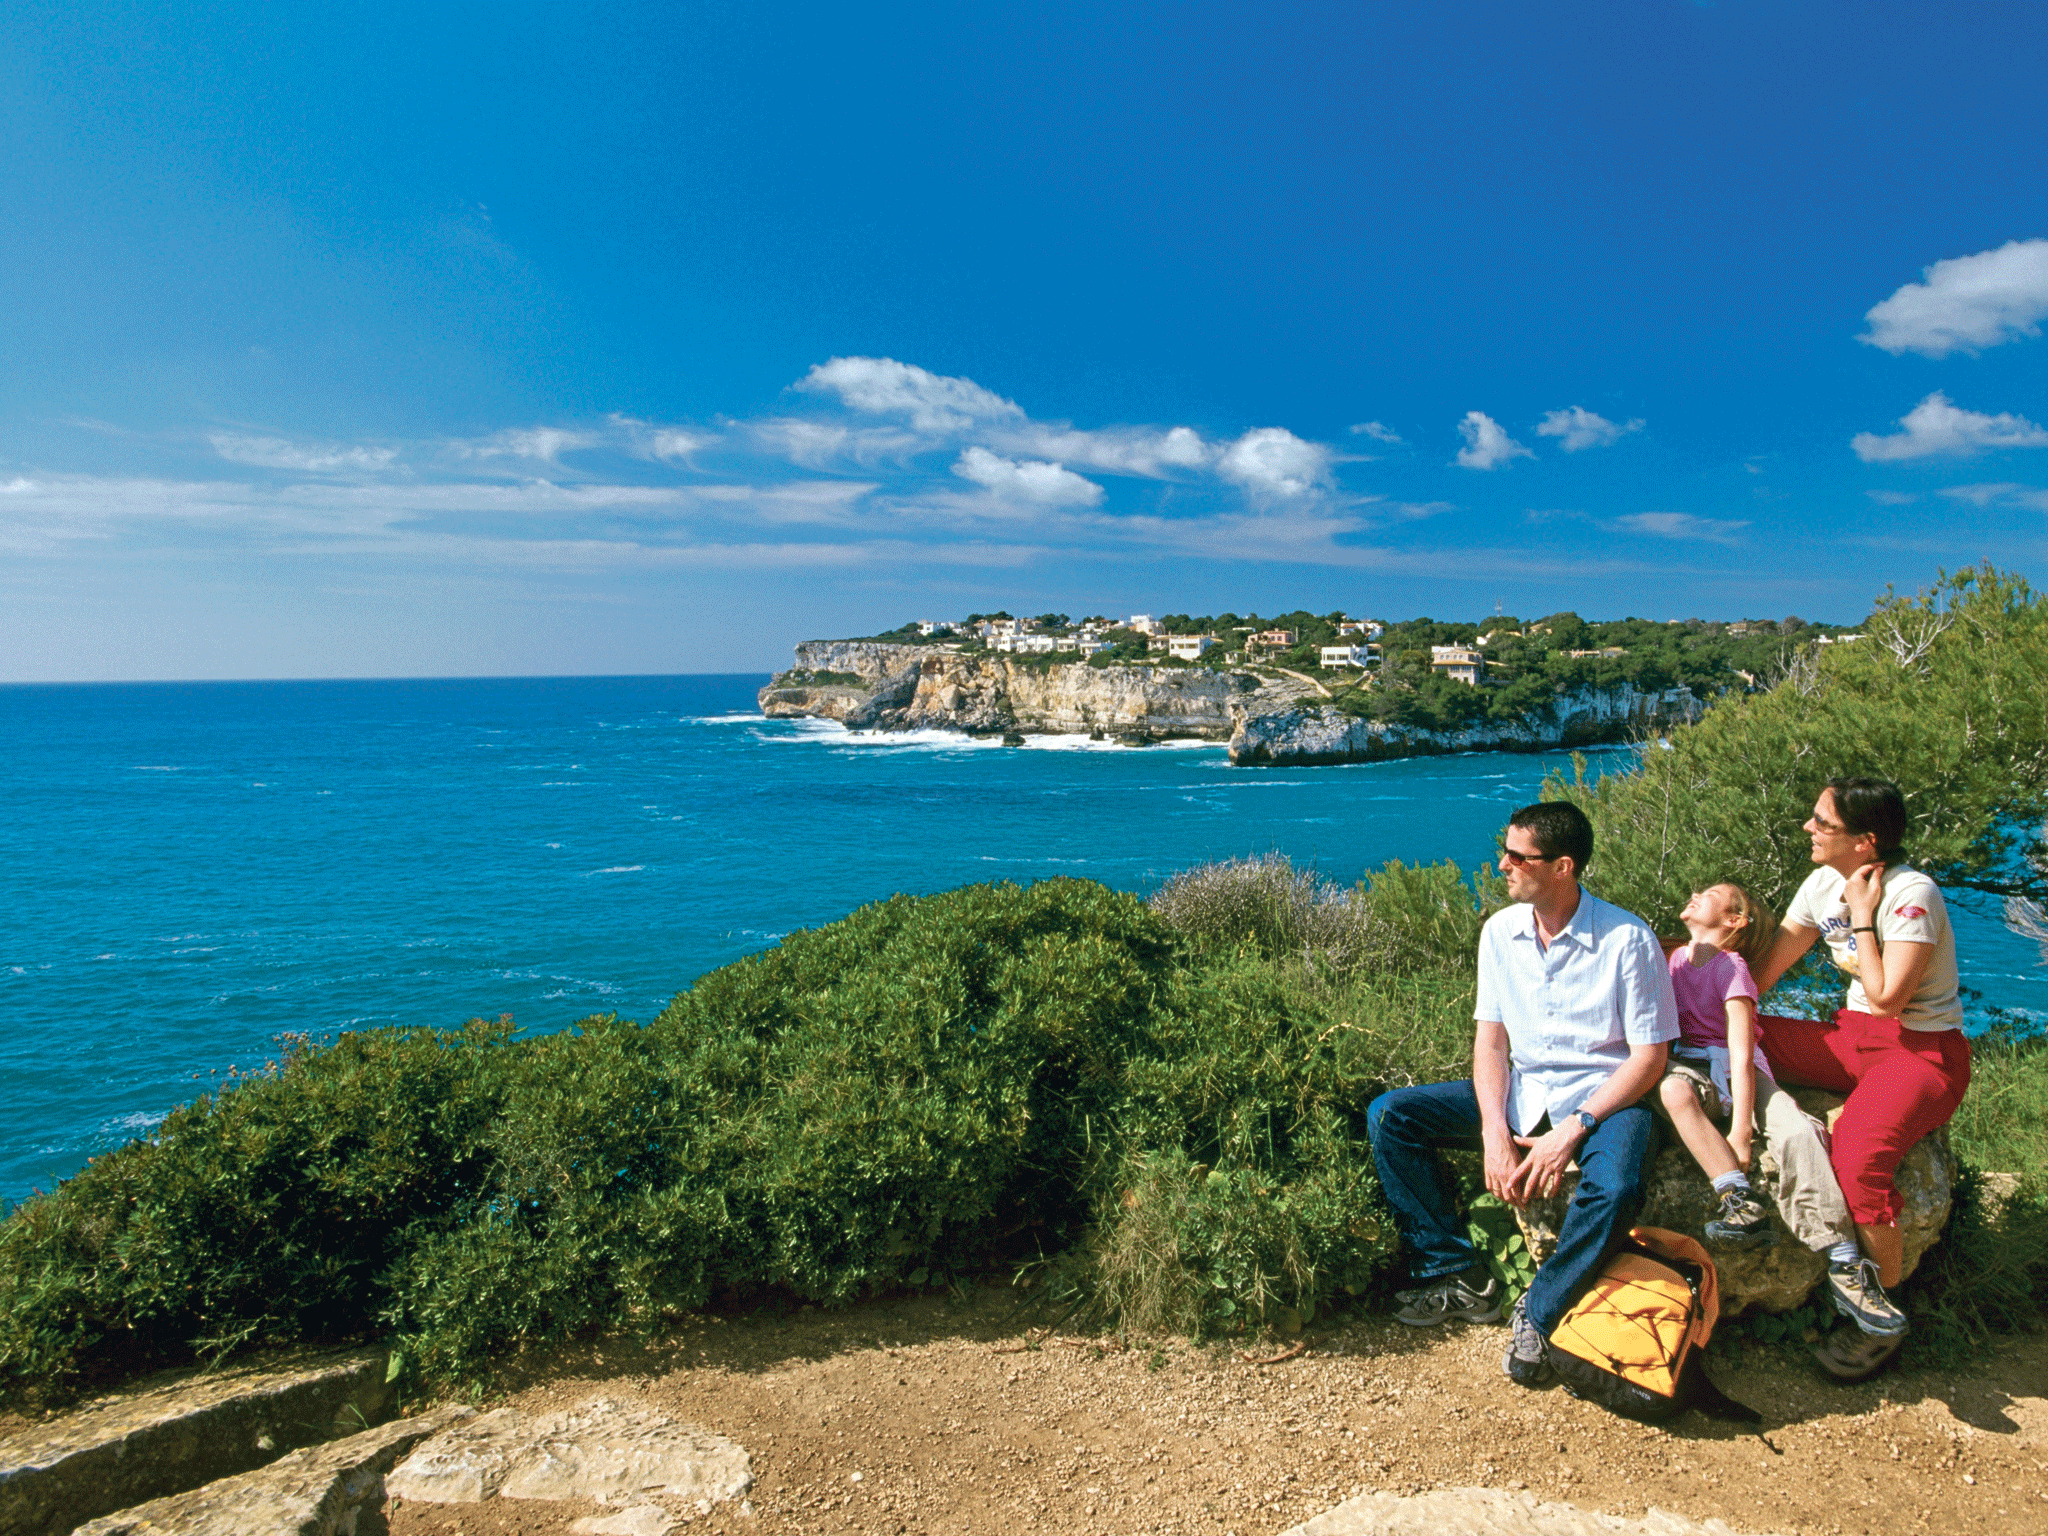 Family fun: get active on the shores of Europe